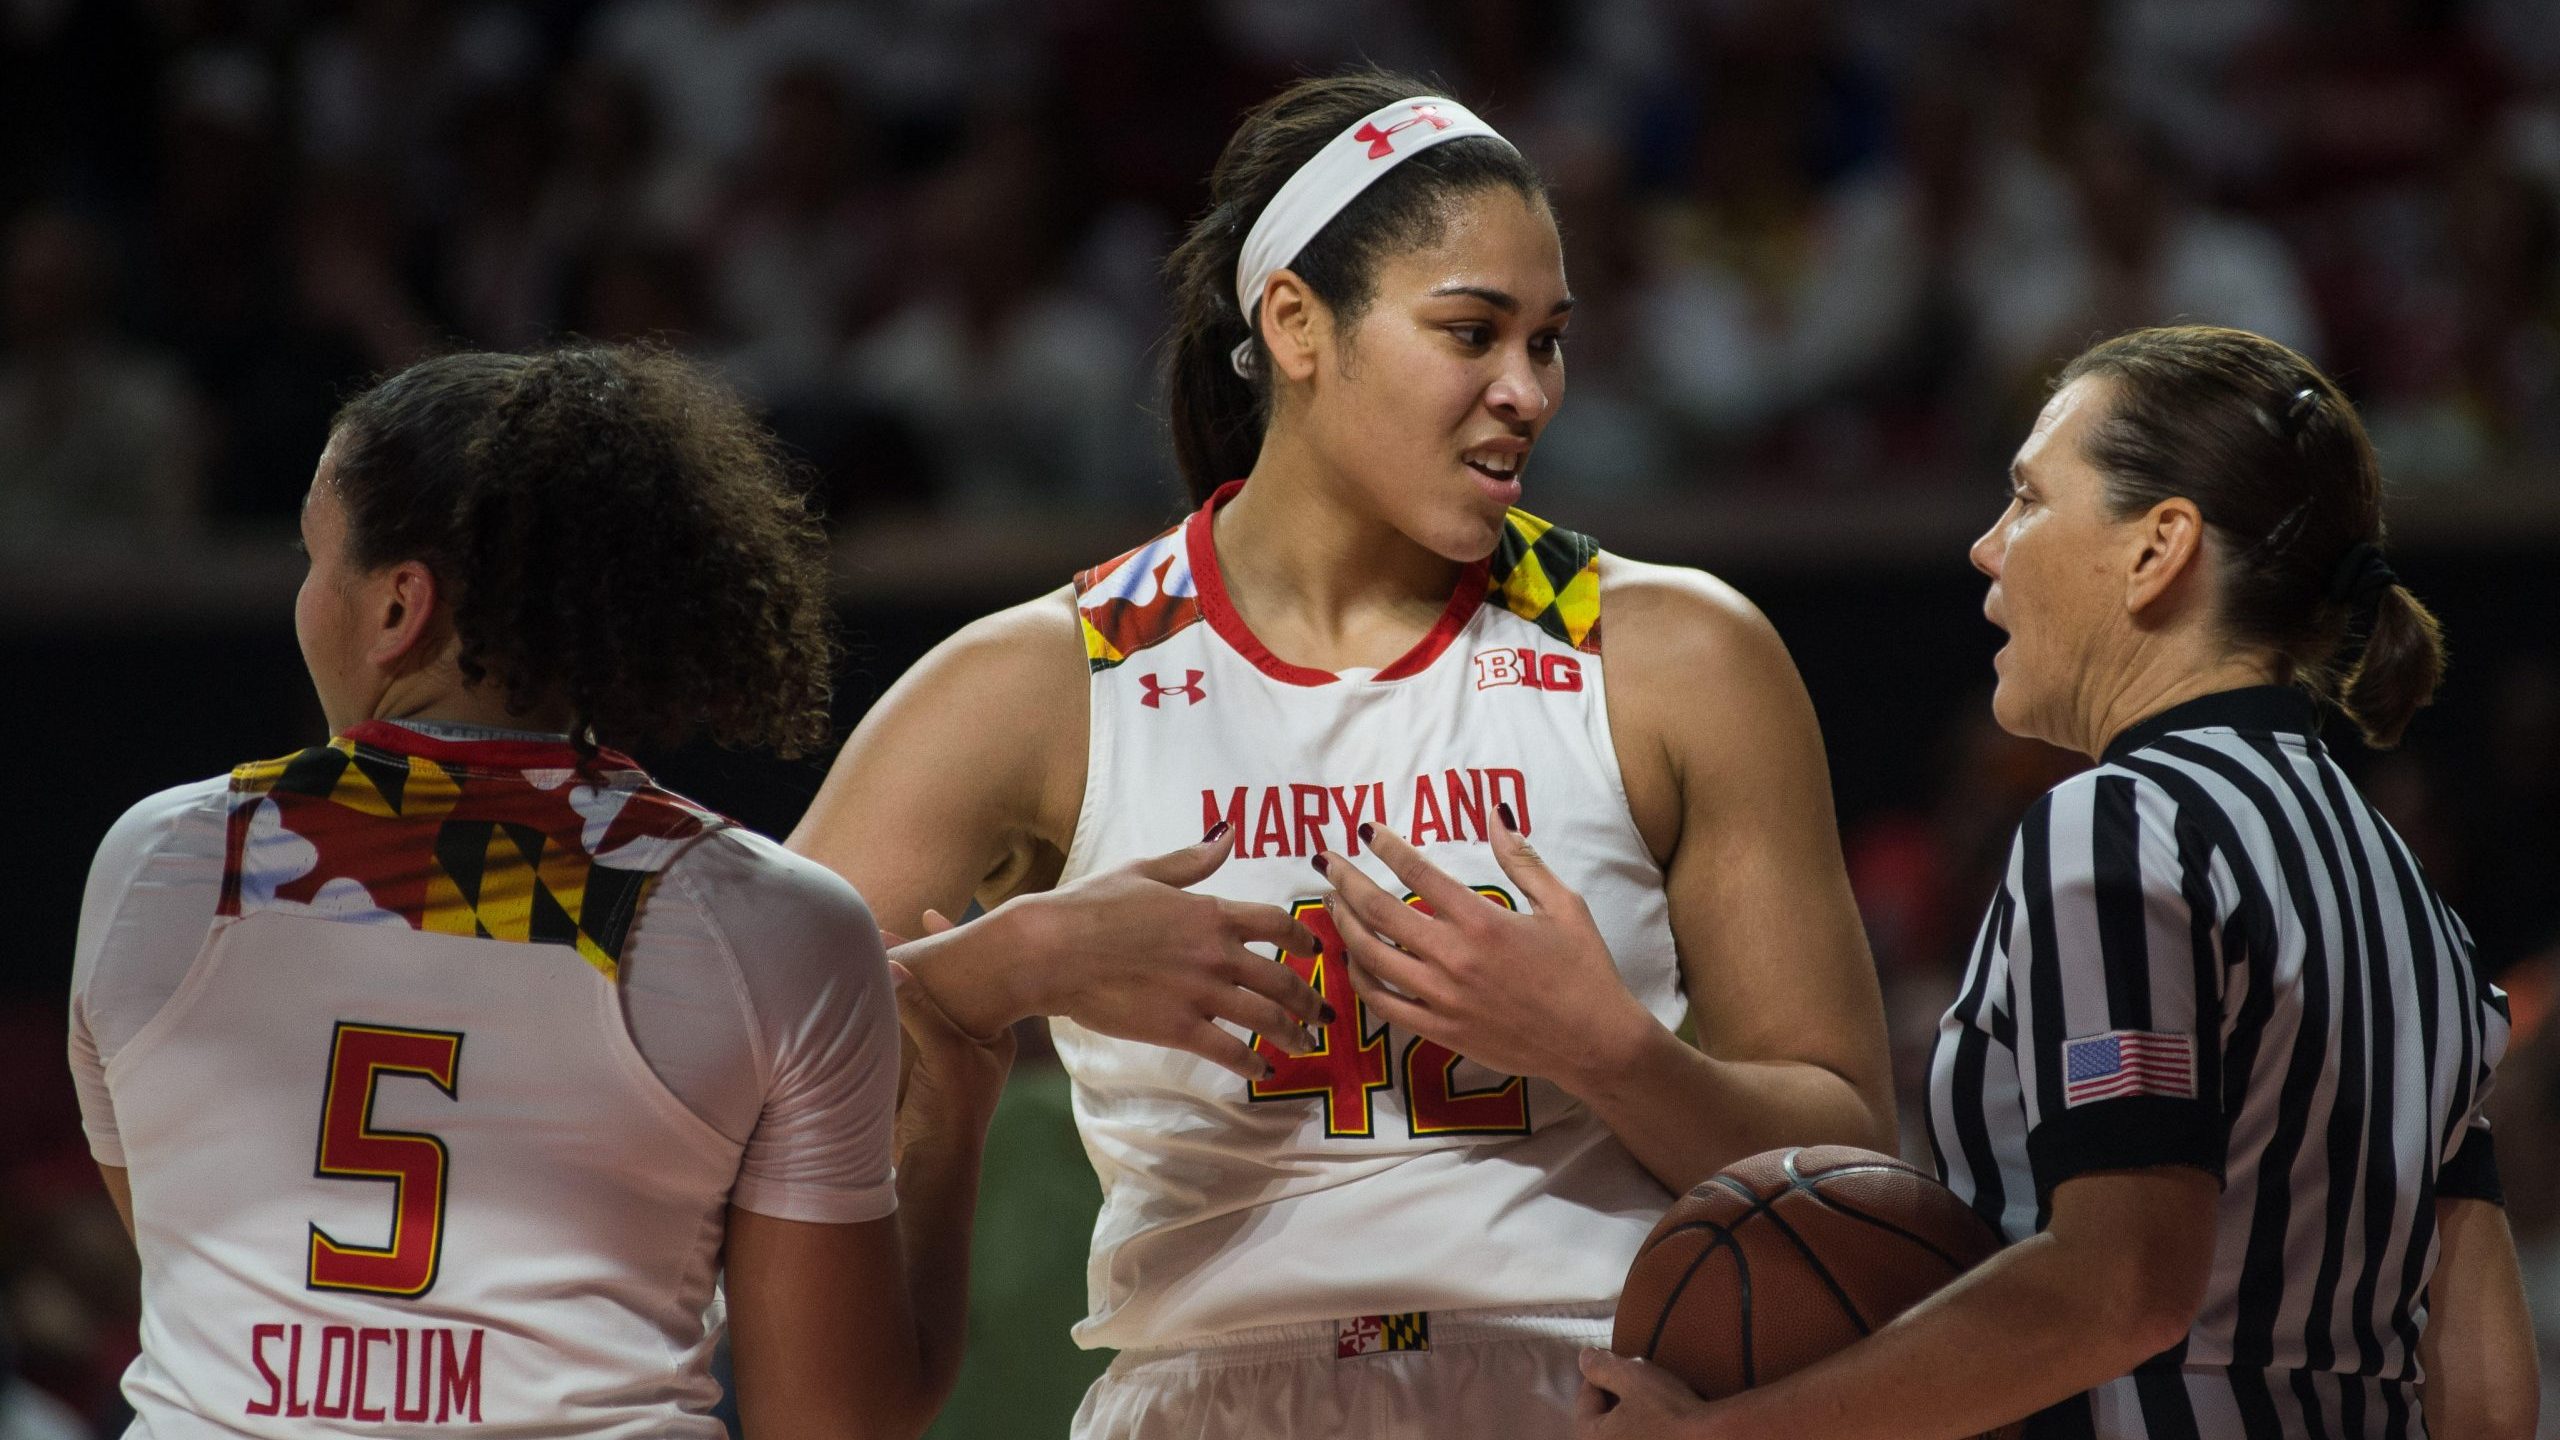 Brionna Jones talks to a referee mid-game while playing for the Maryland Terrapins in 2016